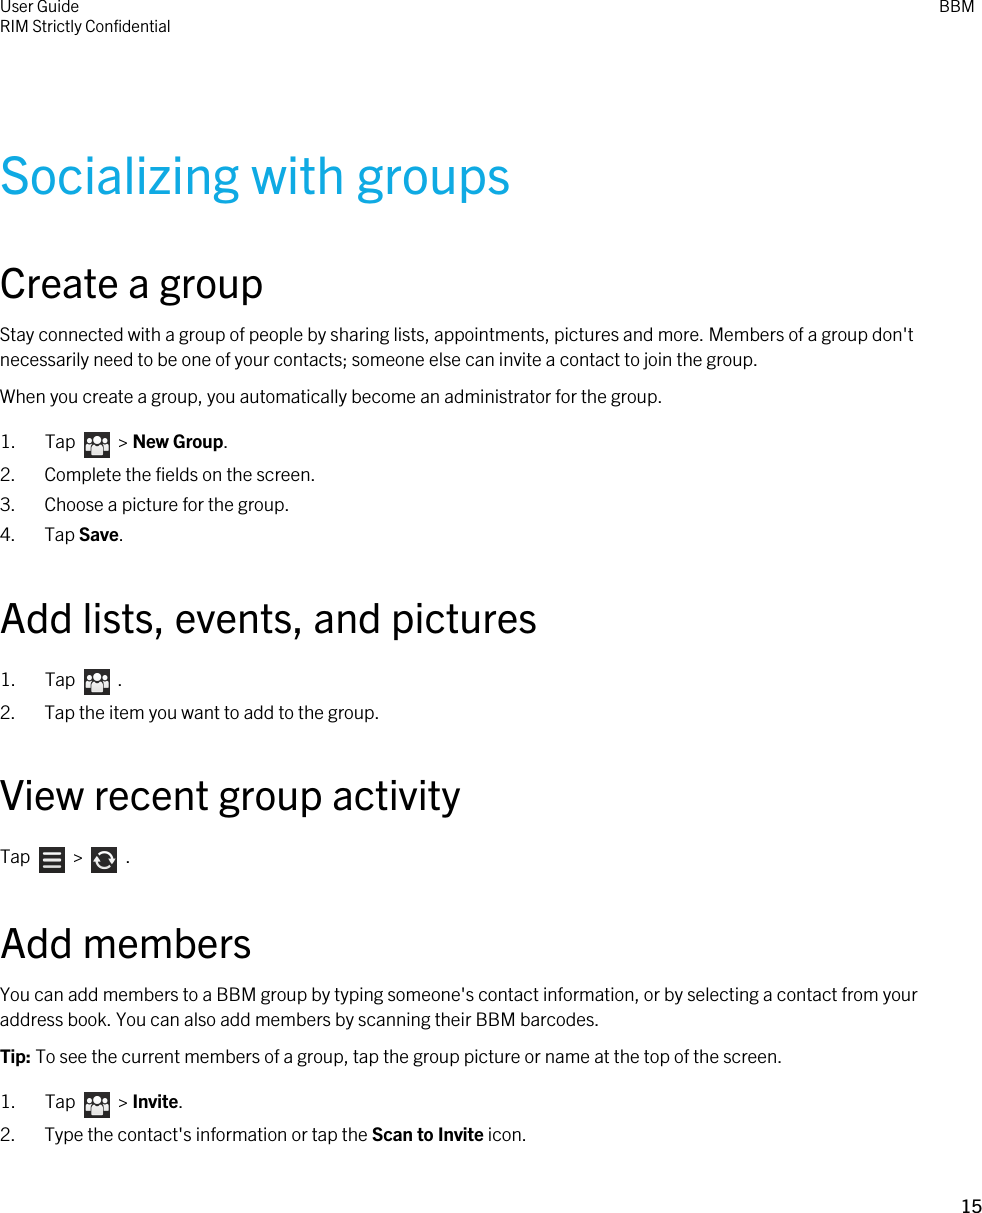 Socializing with groupsCreate a groupStay connected with a group of people by sharing lists, appointments, pictures and more. Members of a group don&apos;t necessarily need to be one of your contacts; someone else can invite a contact to join the group.When you create a group, you automatically become an administrator for the group.1.  Tap    &gt; New Group.2. Complete the fields on the screen.3. Choose a picture for the group.4. Tap Save.Add lists, events, and pictures1.  Tap    .2. Tap the item you want to add to the group.View recent group activityTap    &gt;    .Add membersYou can add members to a BBM group by typing someone&apos;s contact information, or by selecting a contact from your address book. You can also add members by scanning their BBM barcodes.Tip: To see the current members of a group, tap the group picture or name at the top of the screen.1.  Tap    &gt; Invite.2. Type the contact&apos;s information or tap the Scan to Invite icon.User GuideRIM Strictly Confidential BBM15 